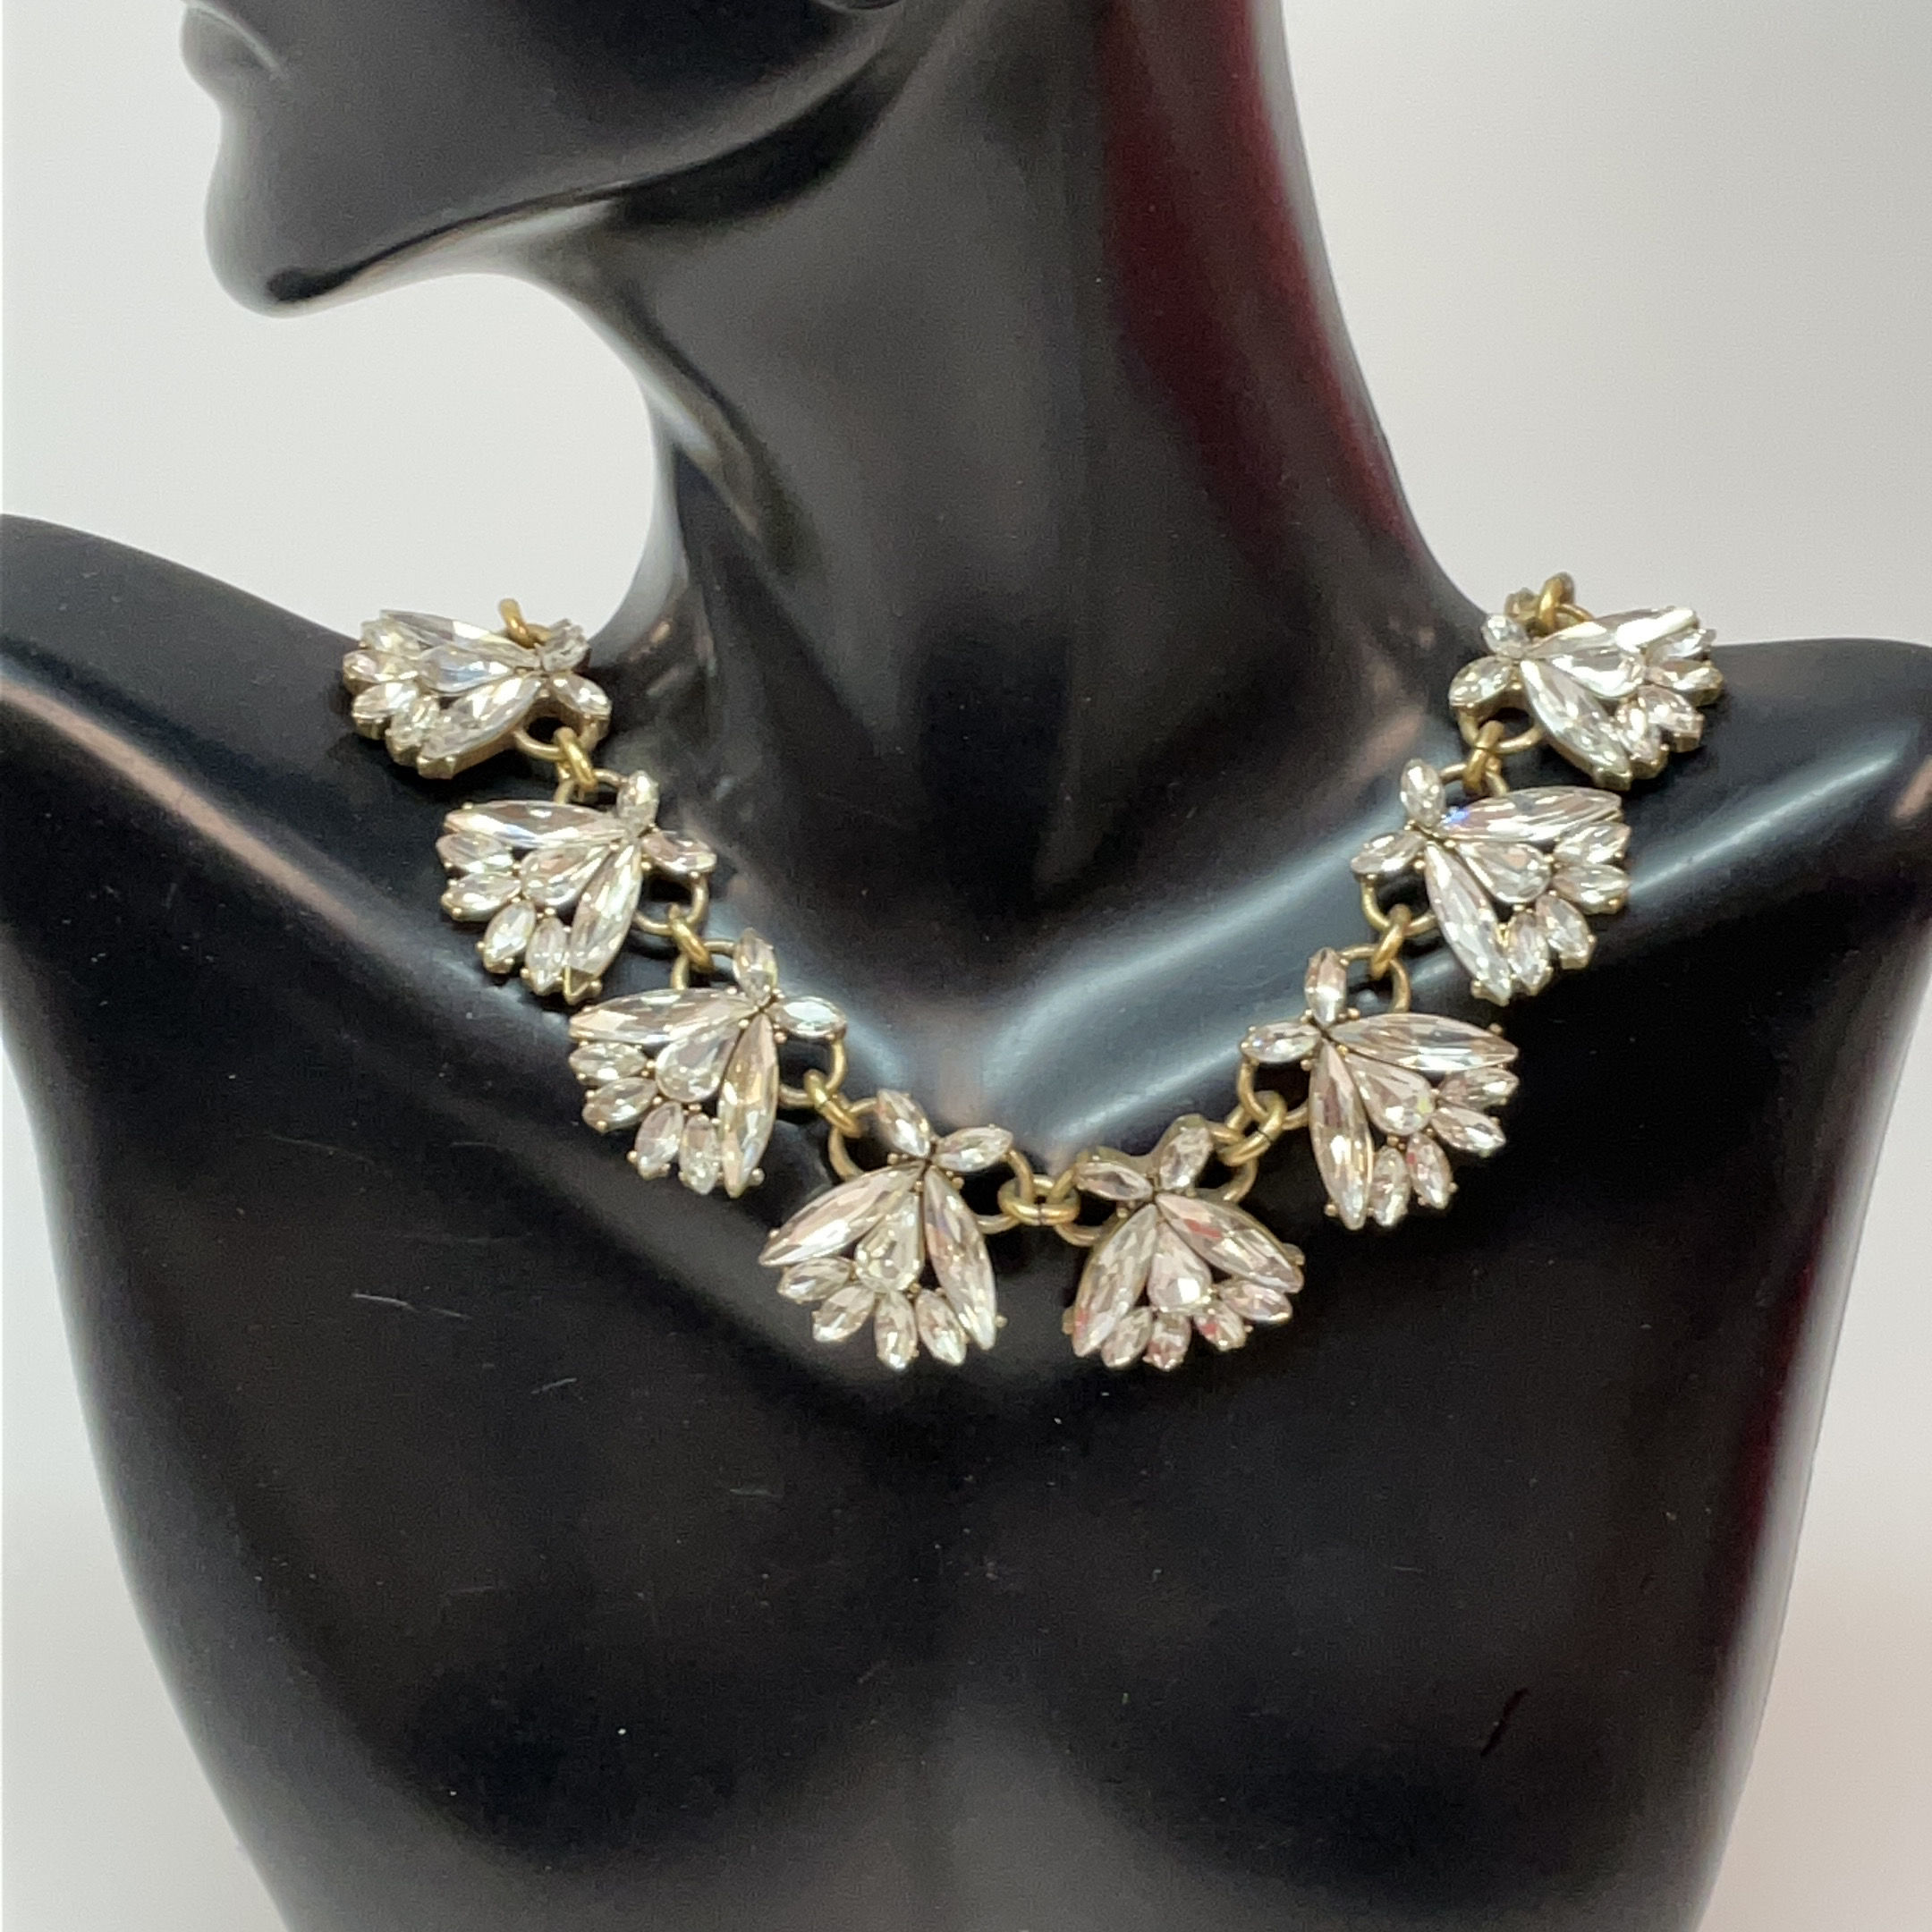 J.Crew rhinestone necklace with gold tones. 15” long and attends almost 2”.  EUC | Rhinestone necklace, Gold tones, Rhinestone